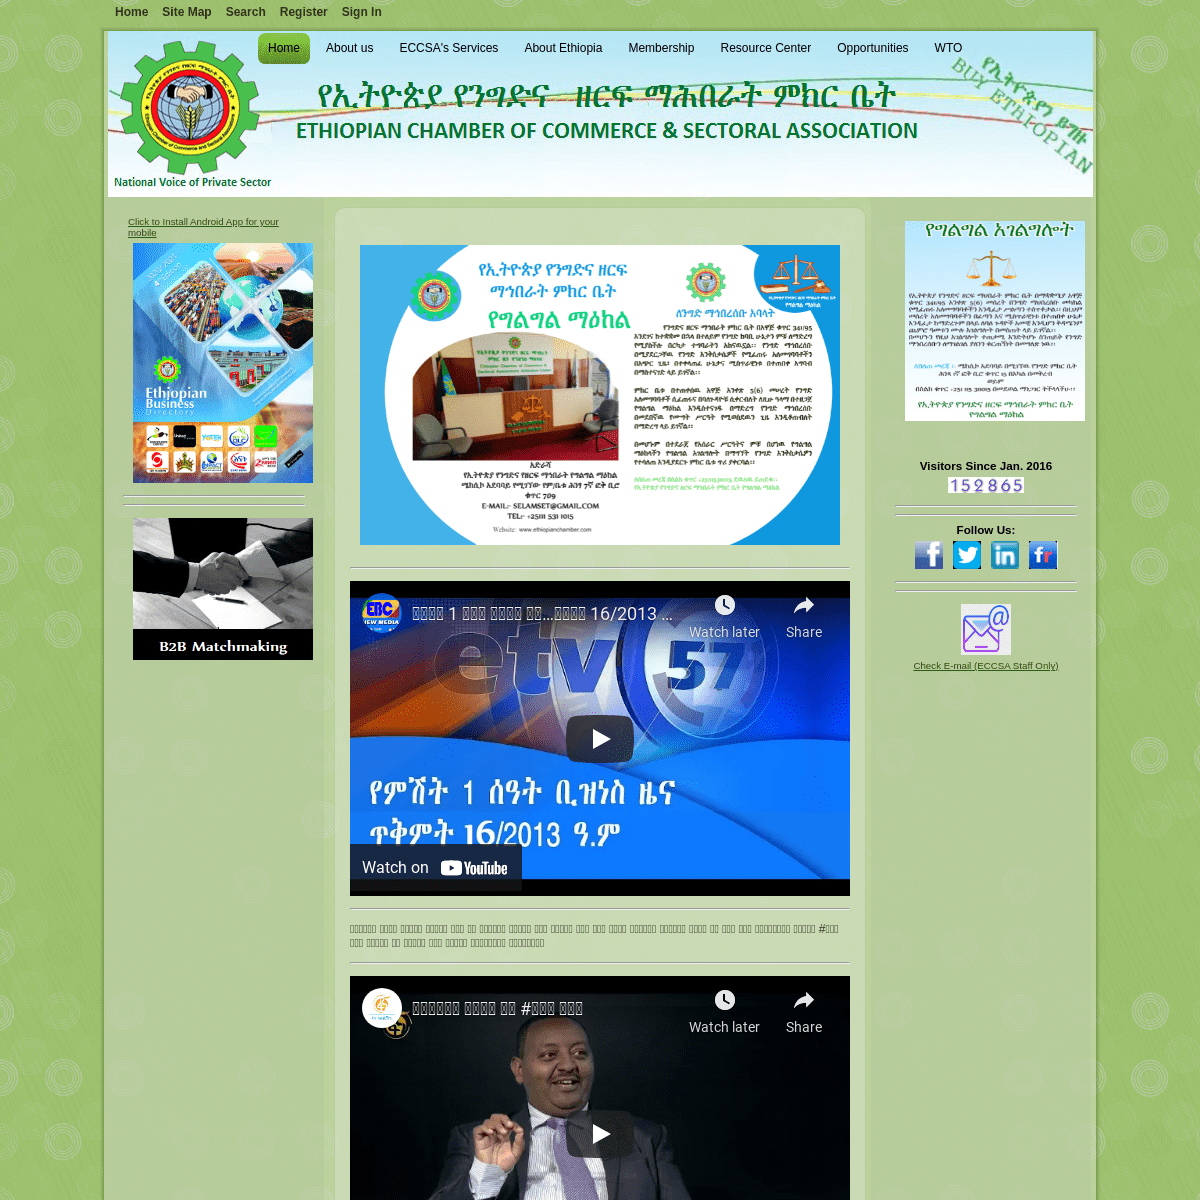 A complete backup of https://ethiopianchamber.com